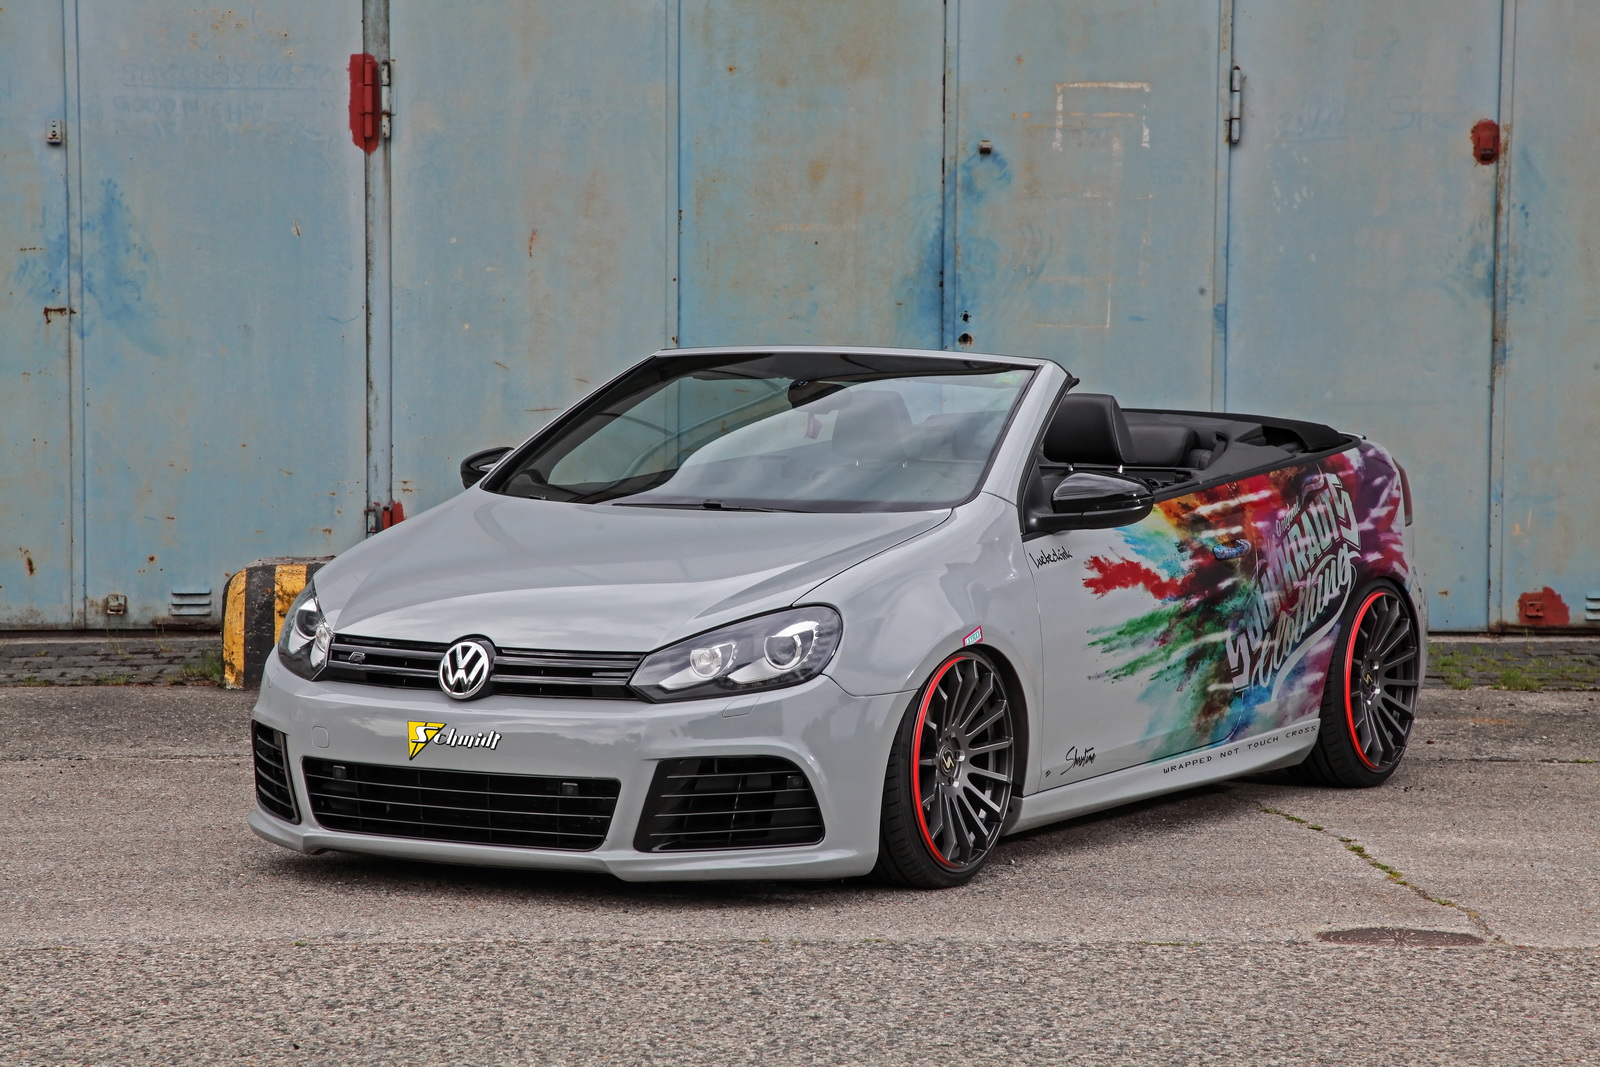 Schmidt Picks Tuned VW Golf VI Convertible To Show Off New Rims